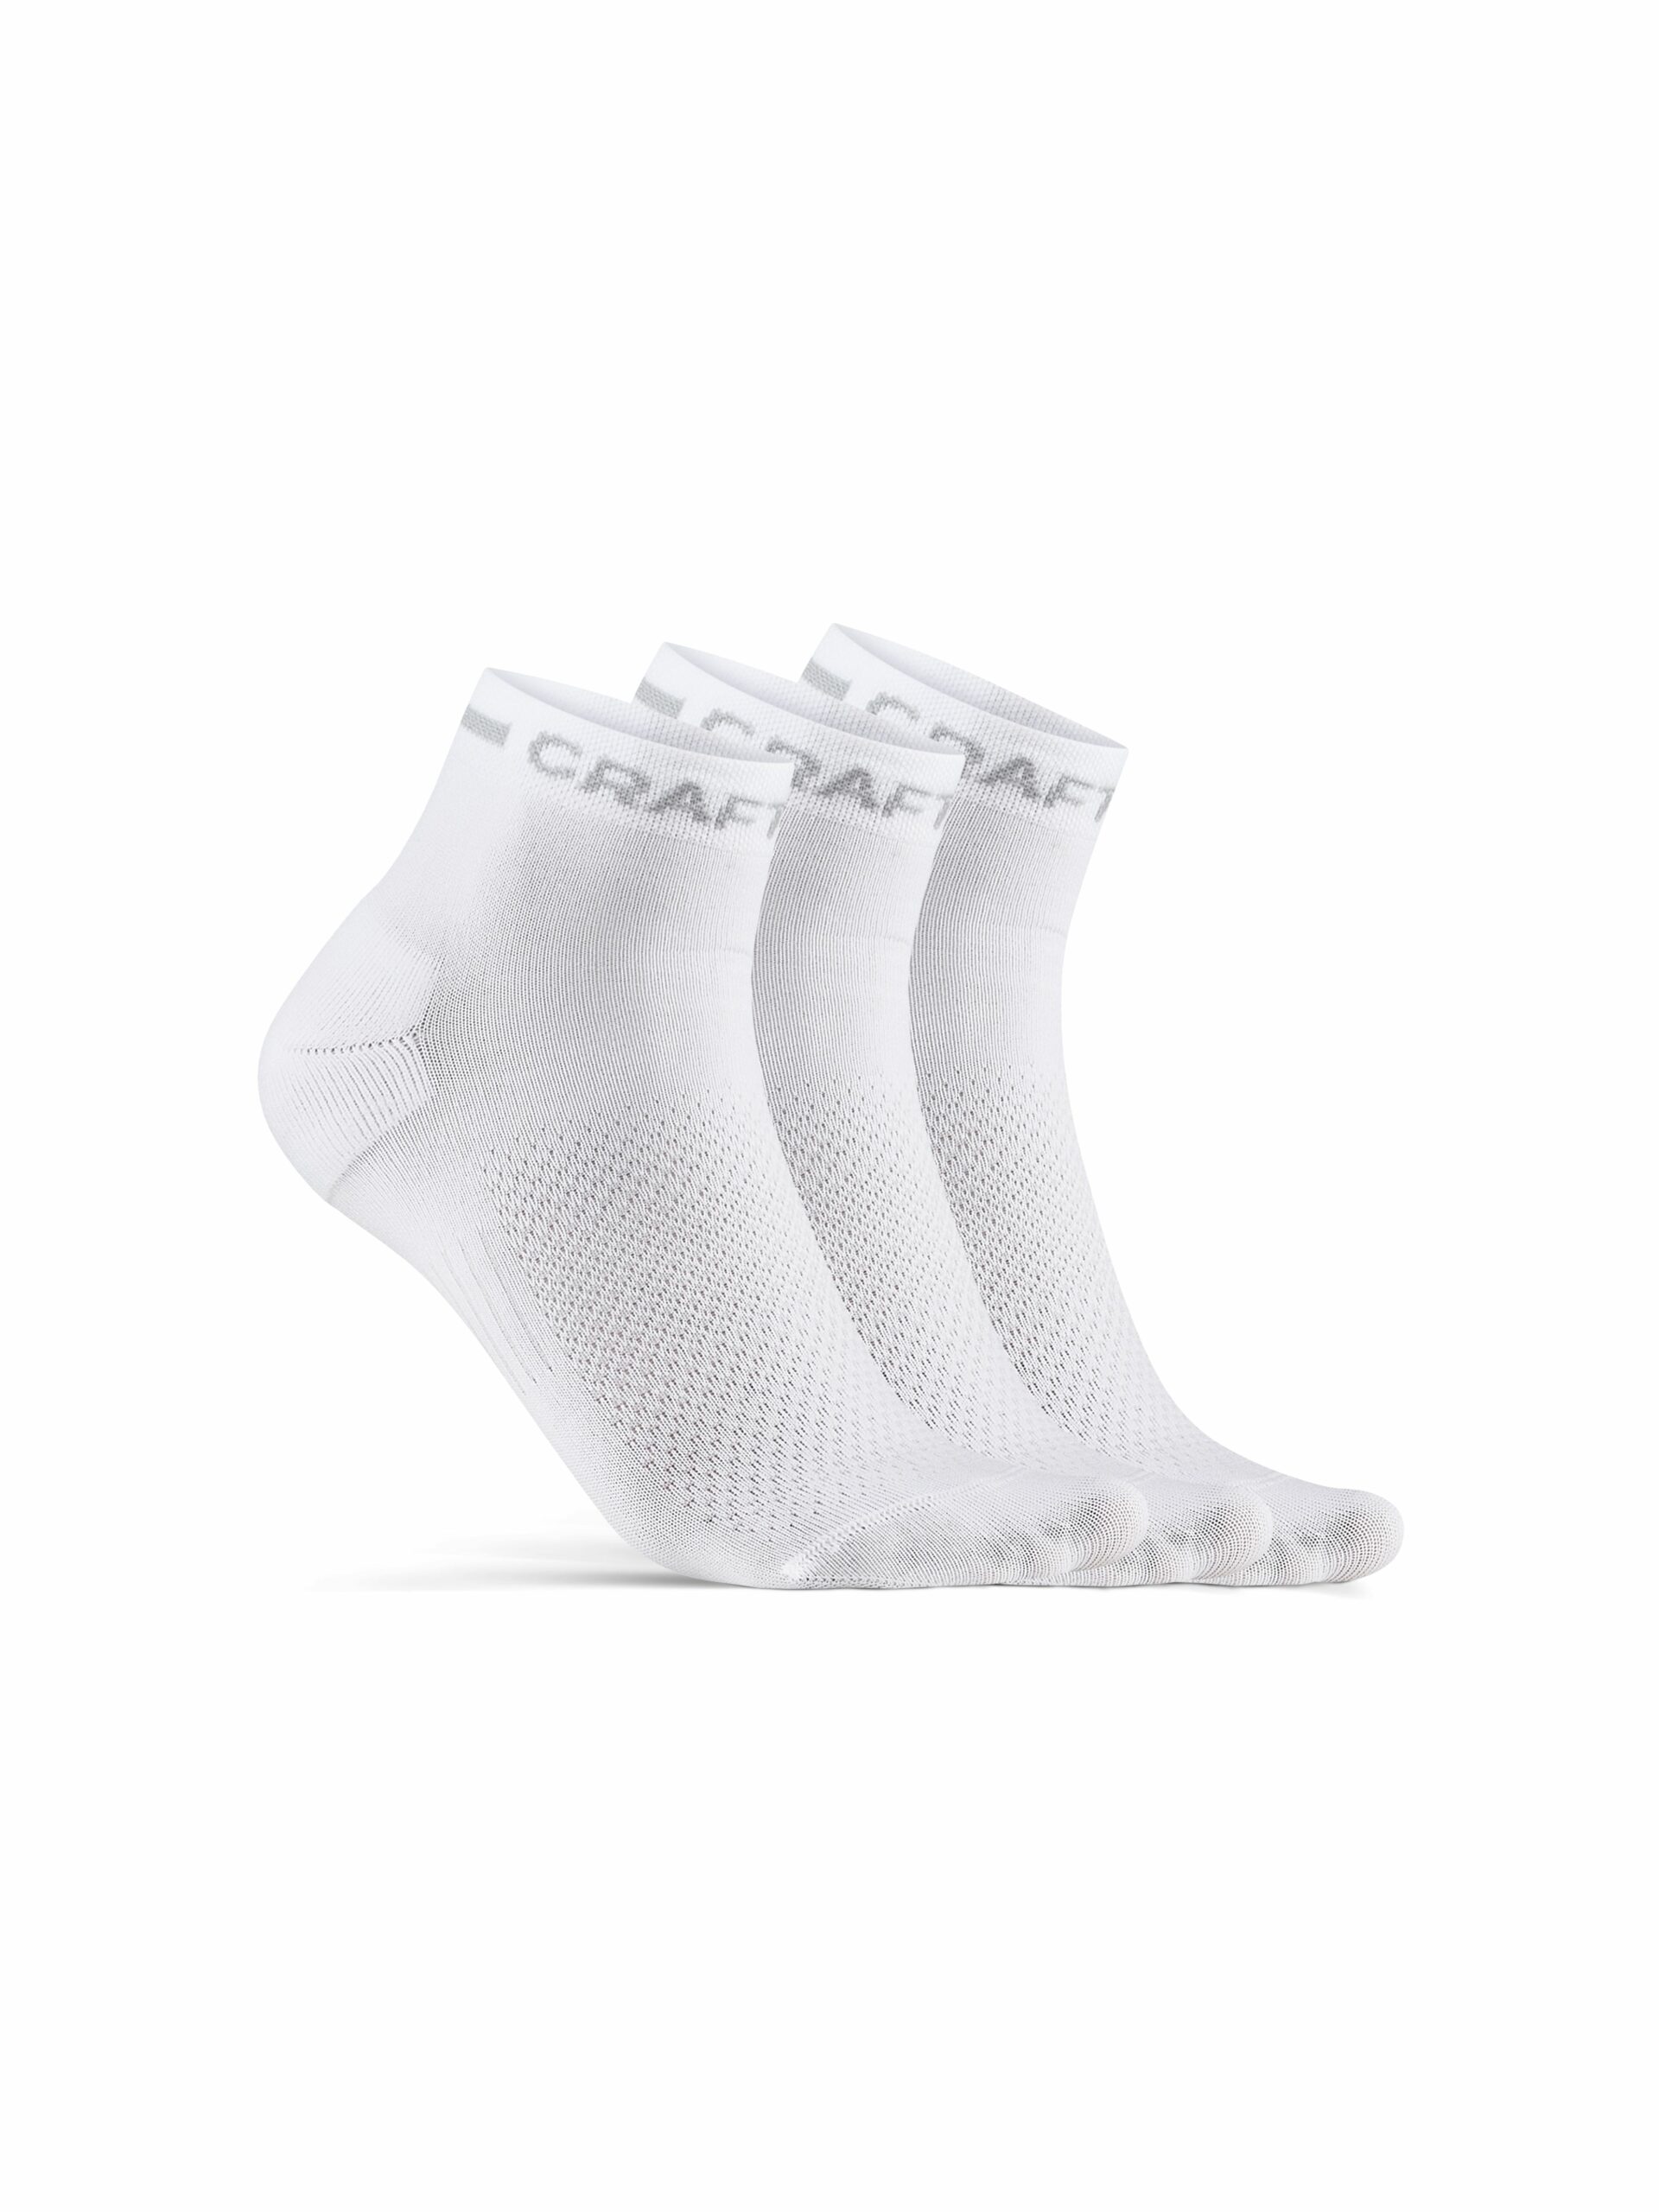 Craft - CORE Dry Mid Sock 3-Pack - White 40/42